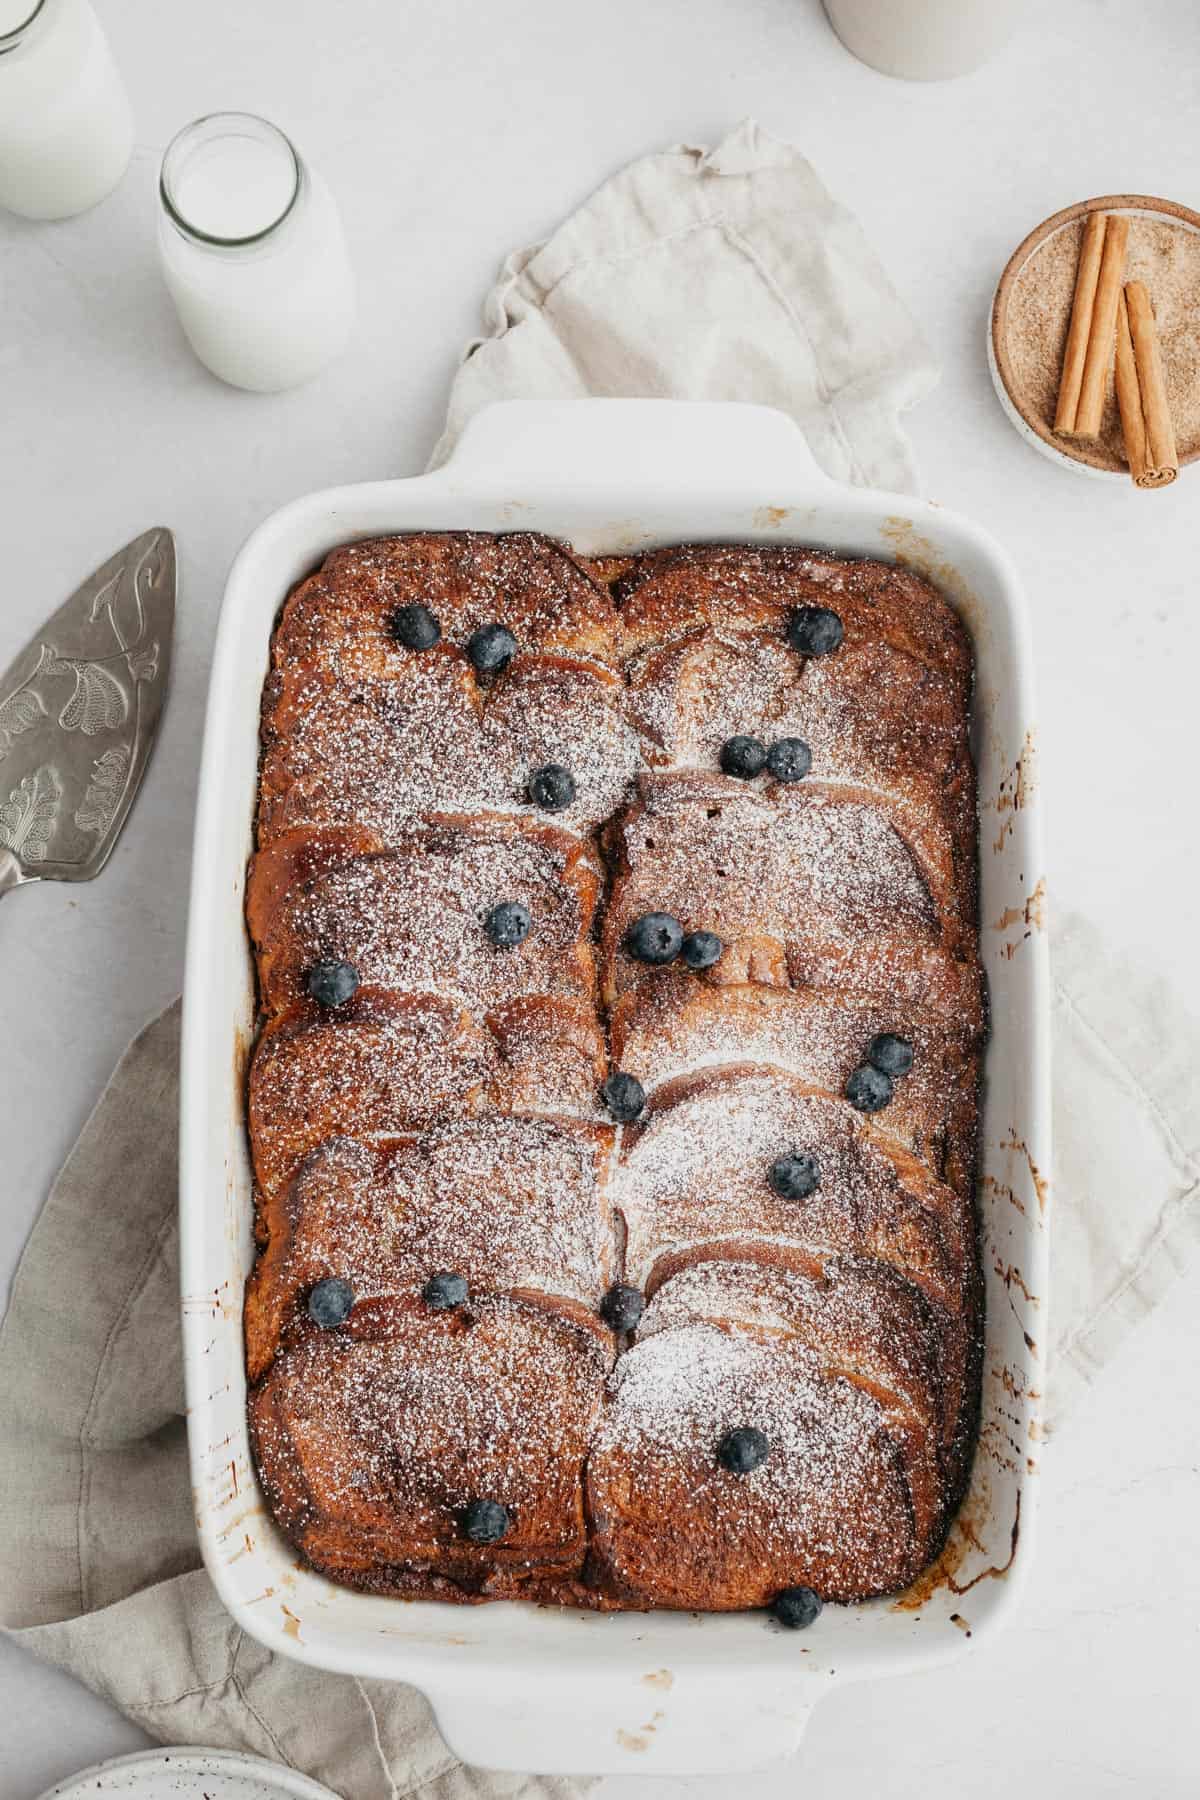 Baked french toast topped with blueberries and maple syrup.